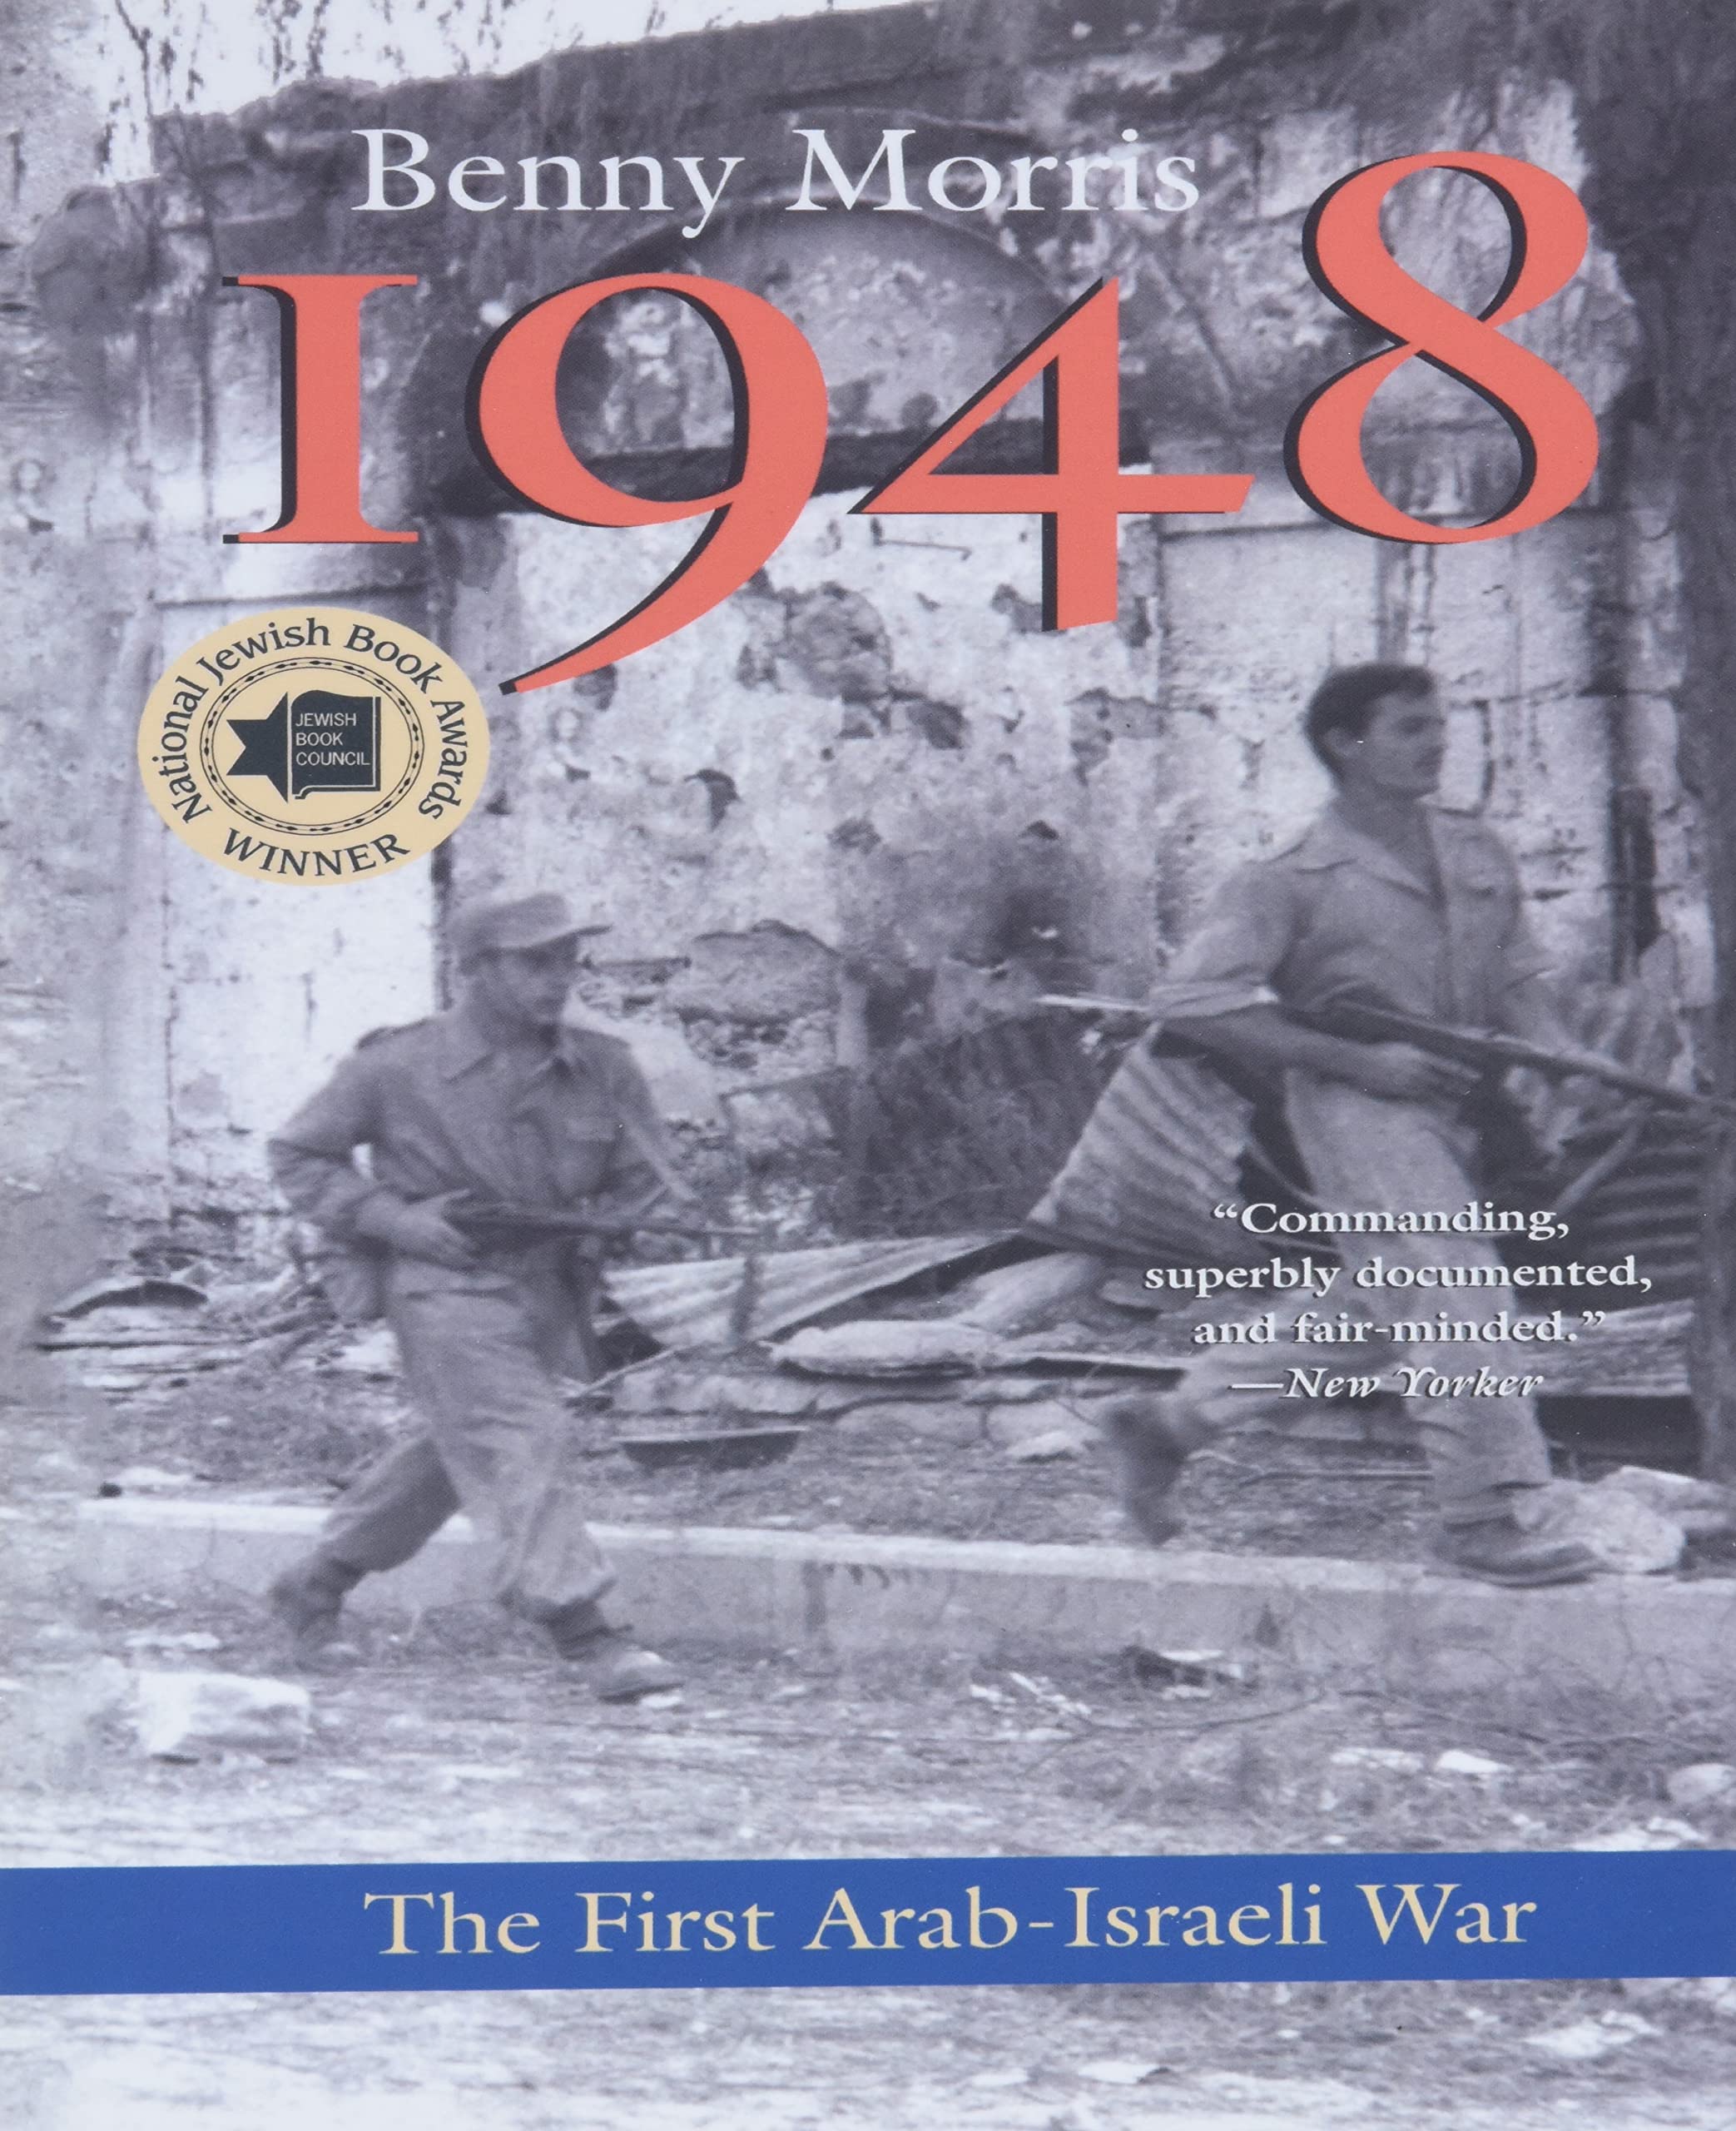 Cover of 1948: A History of the First Arab-Israeli War by Benny Morris